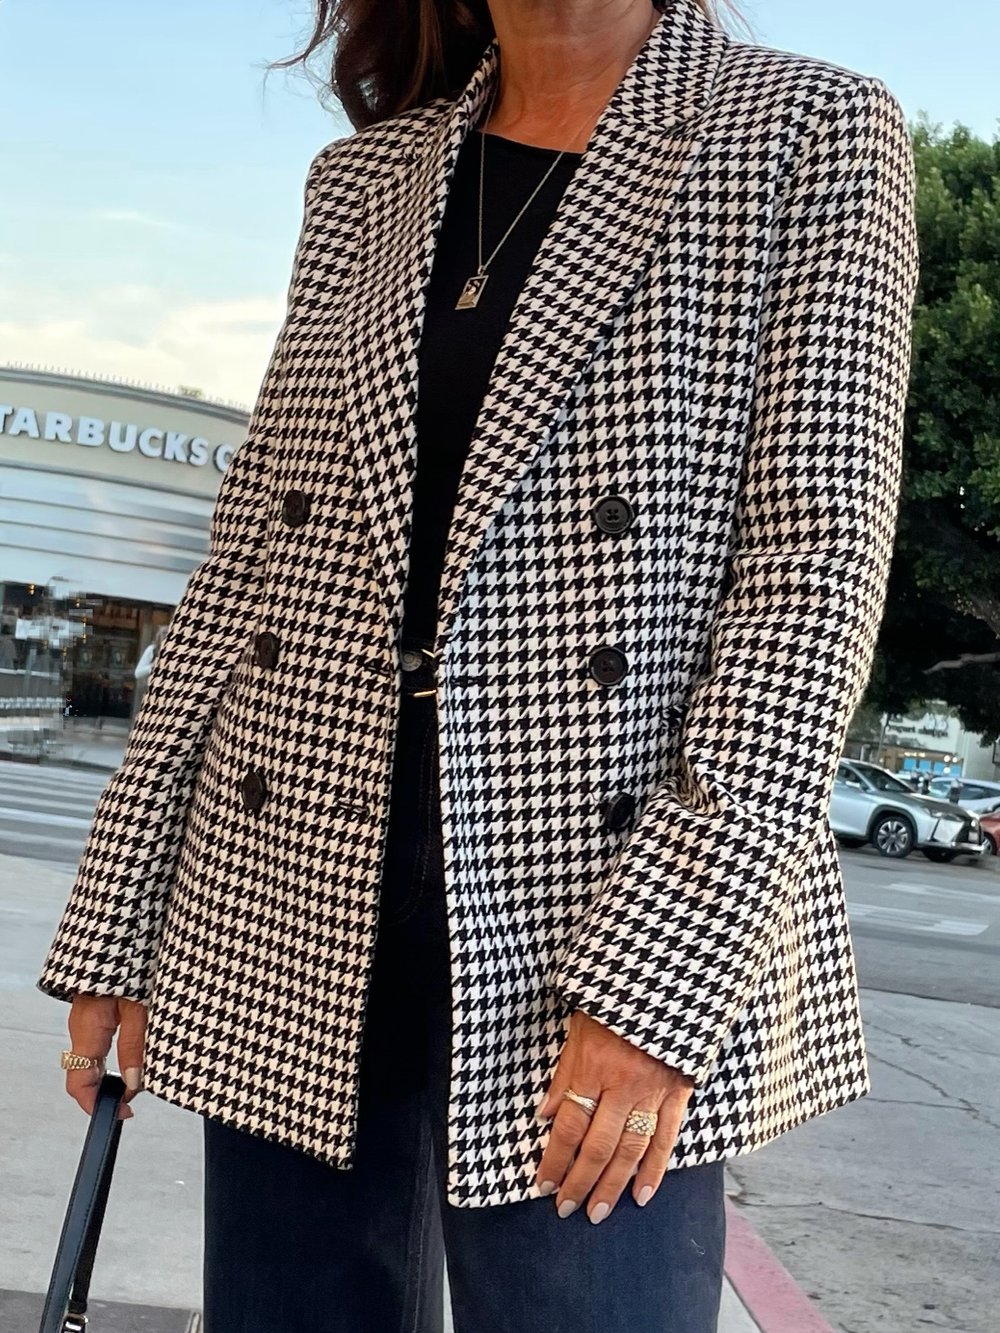 Transition Into Spring With This Houndstooth Blazer — The Glow Girl by ...